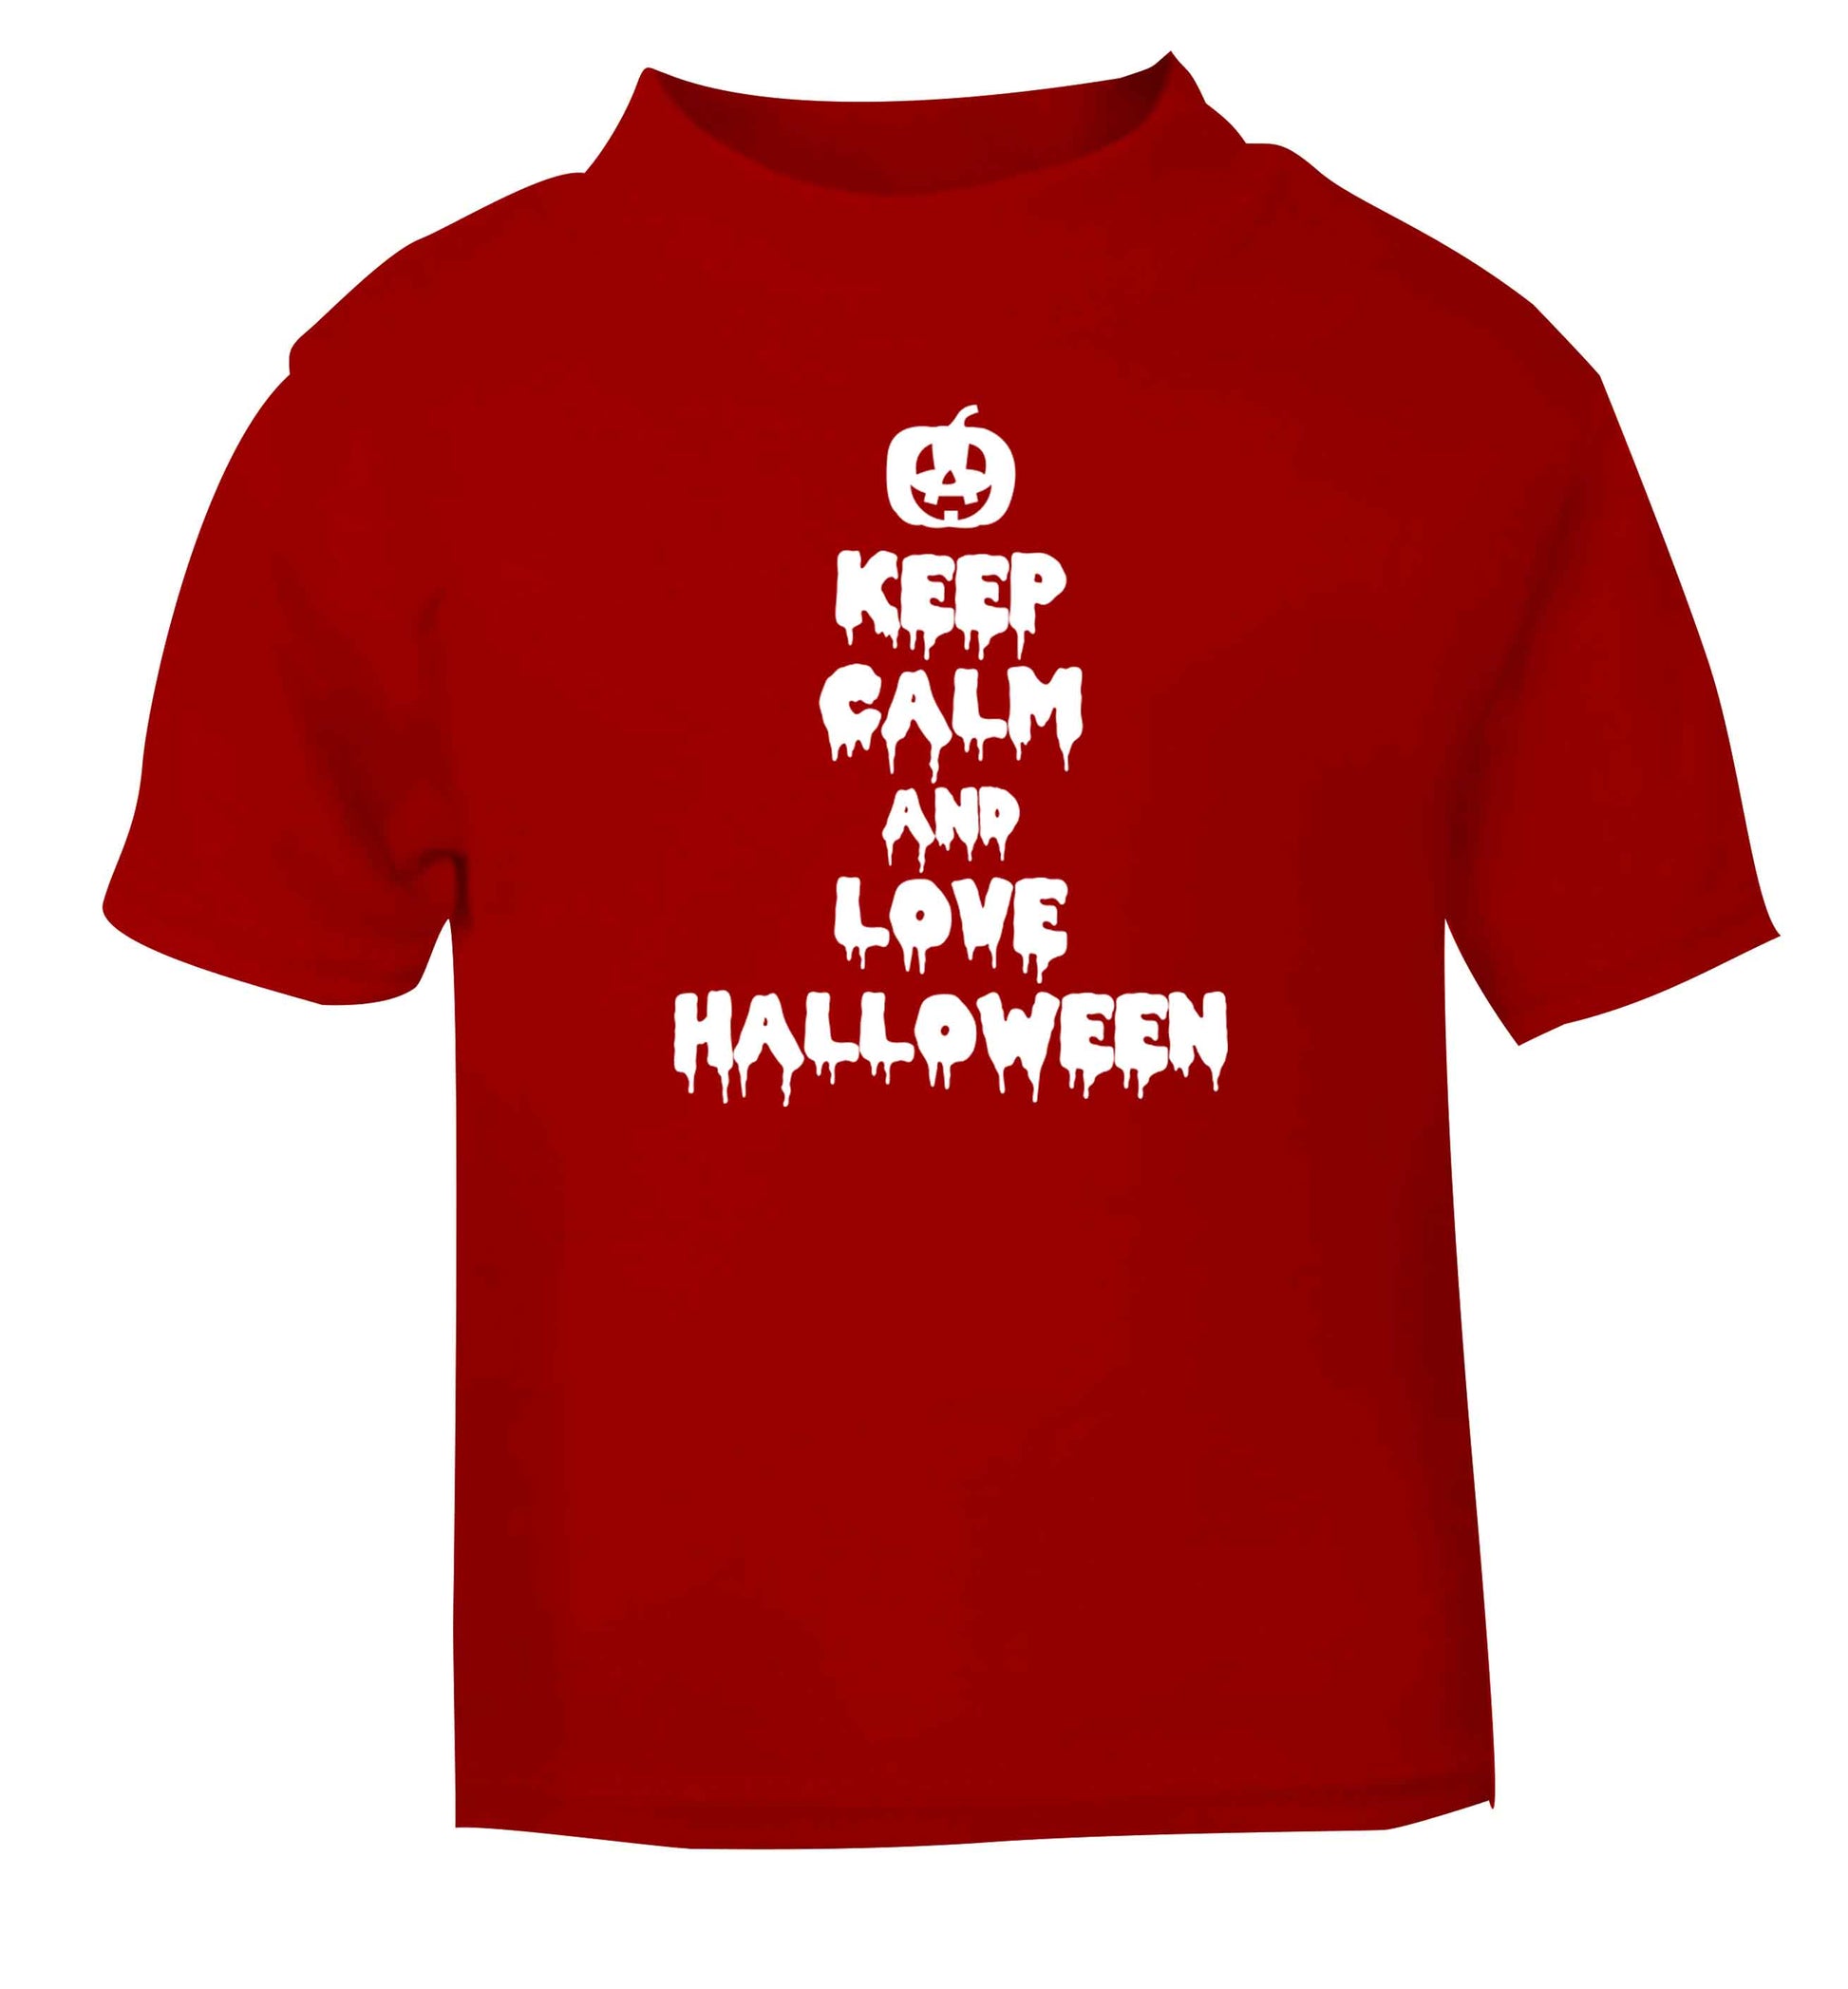 Keep calm and love halloween red baby toddler Tshirt 2 Years